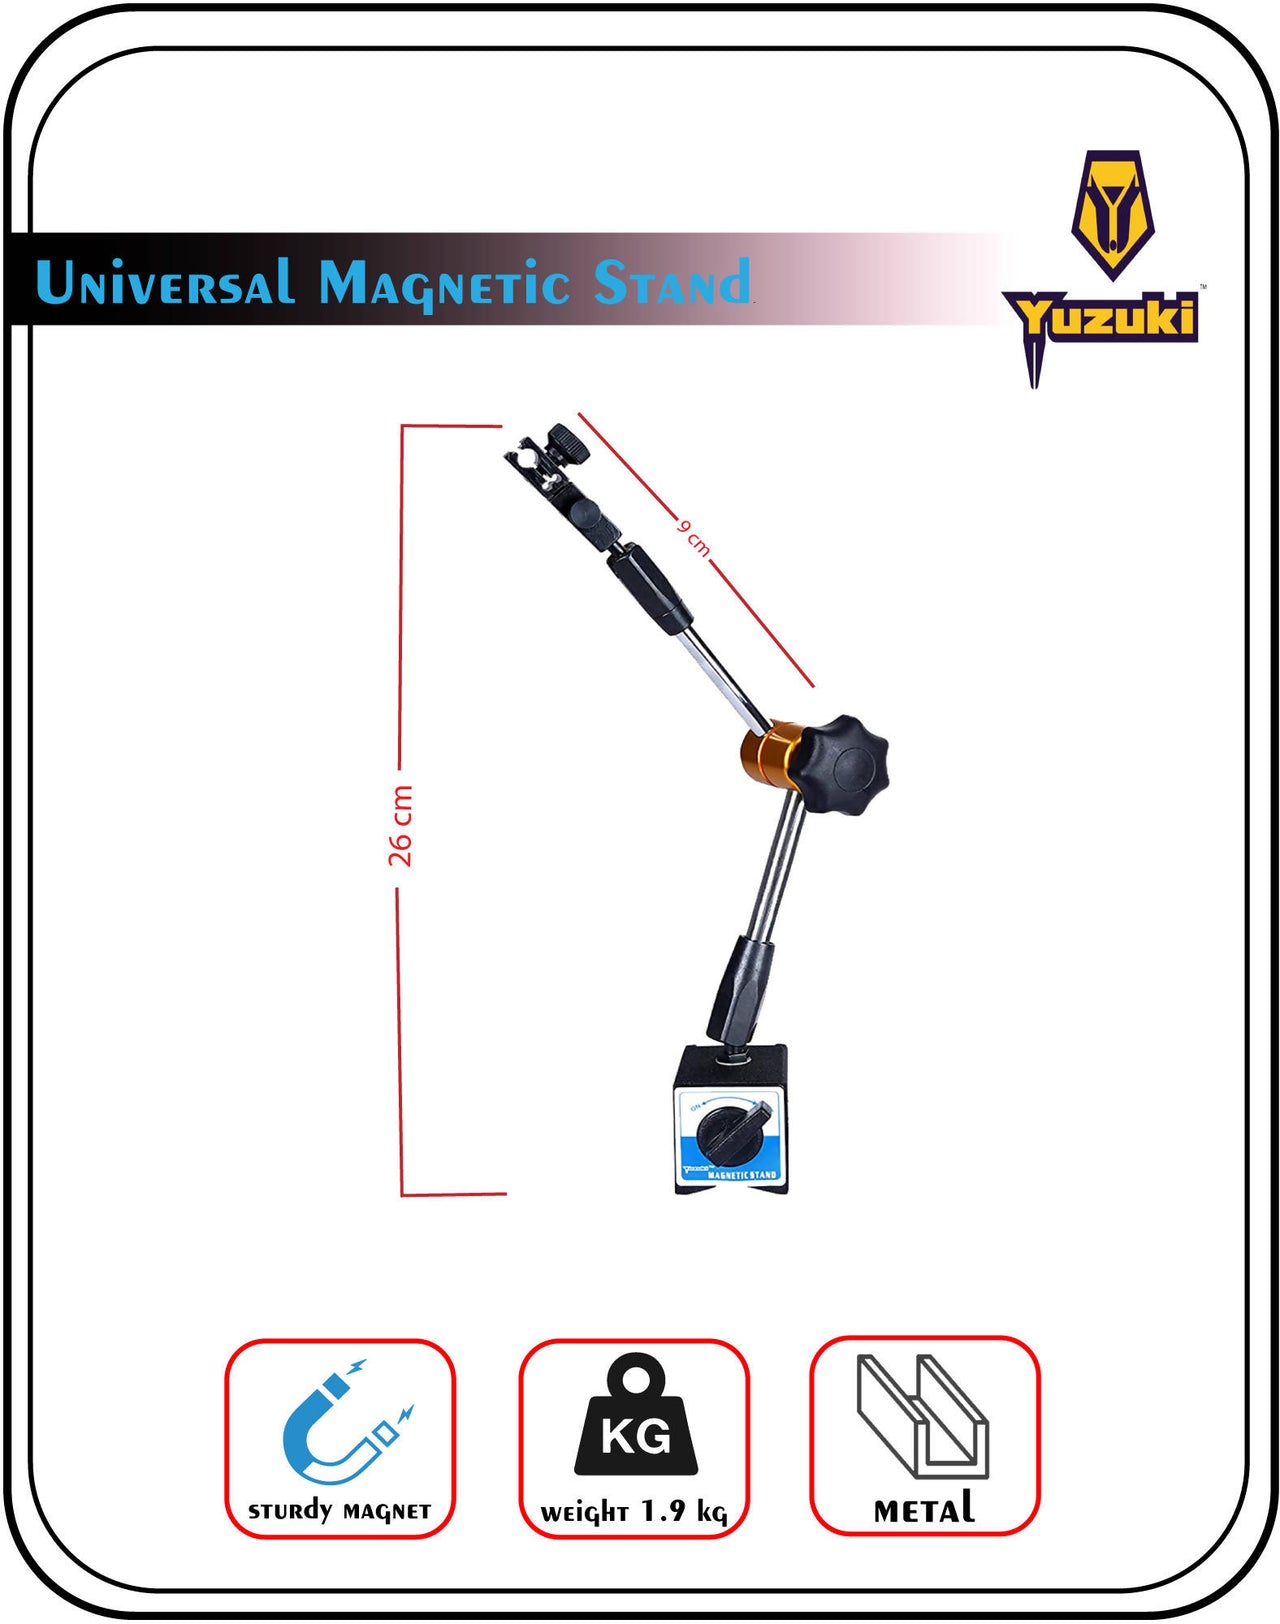 Universal Magnetic Stand